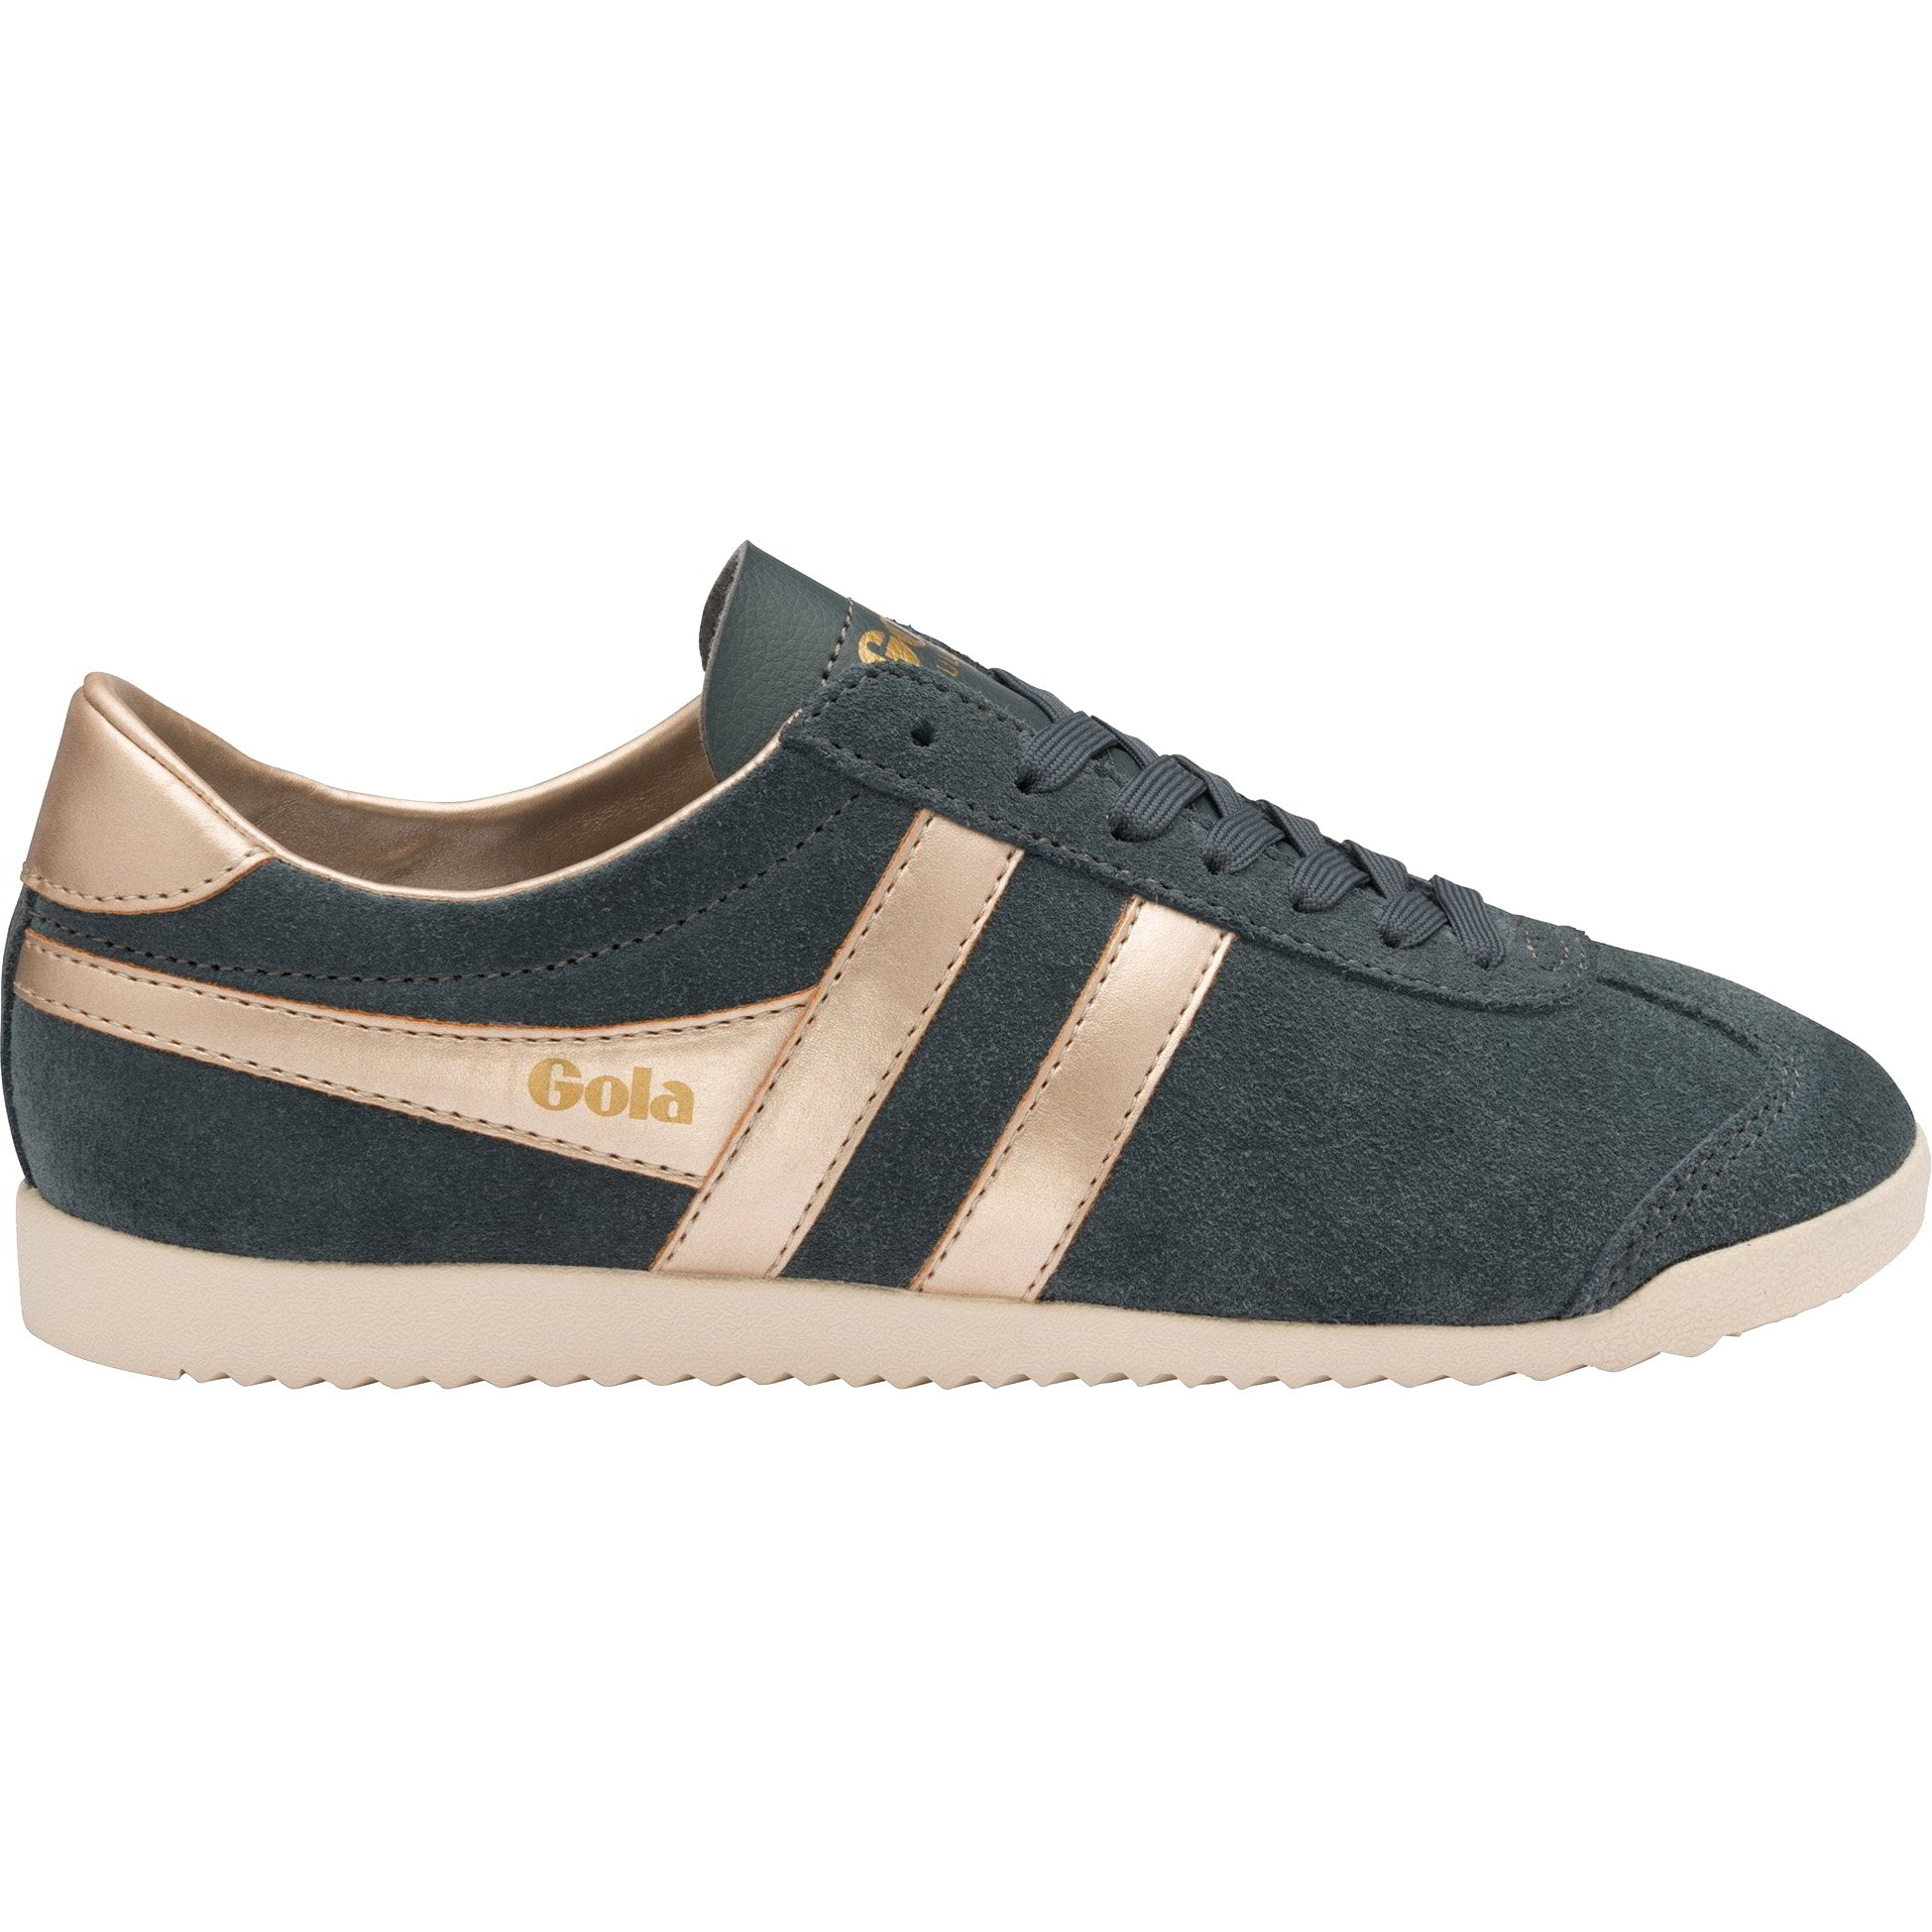 Gola Womens Bullet Pearl Classics Suede Trainers Shoes - UK 7 Grey 2951